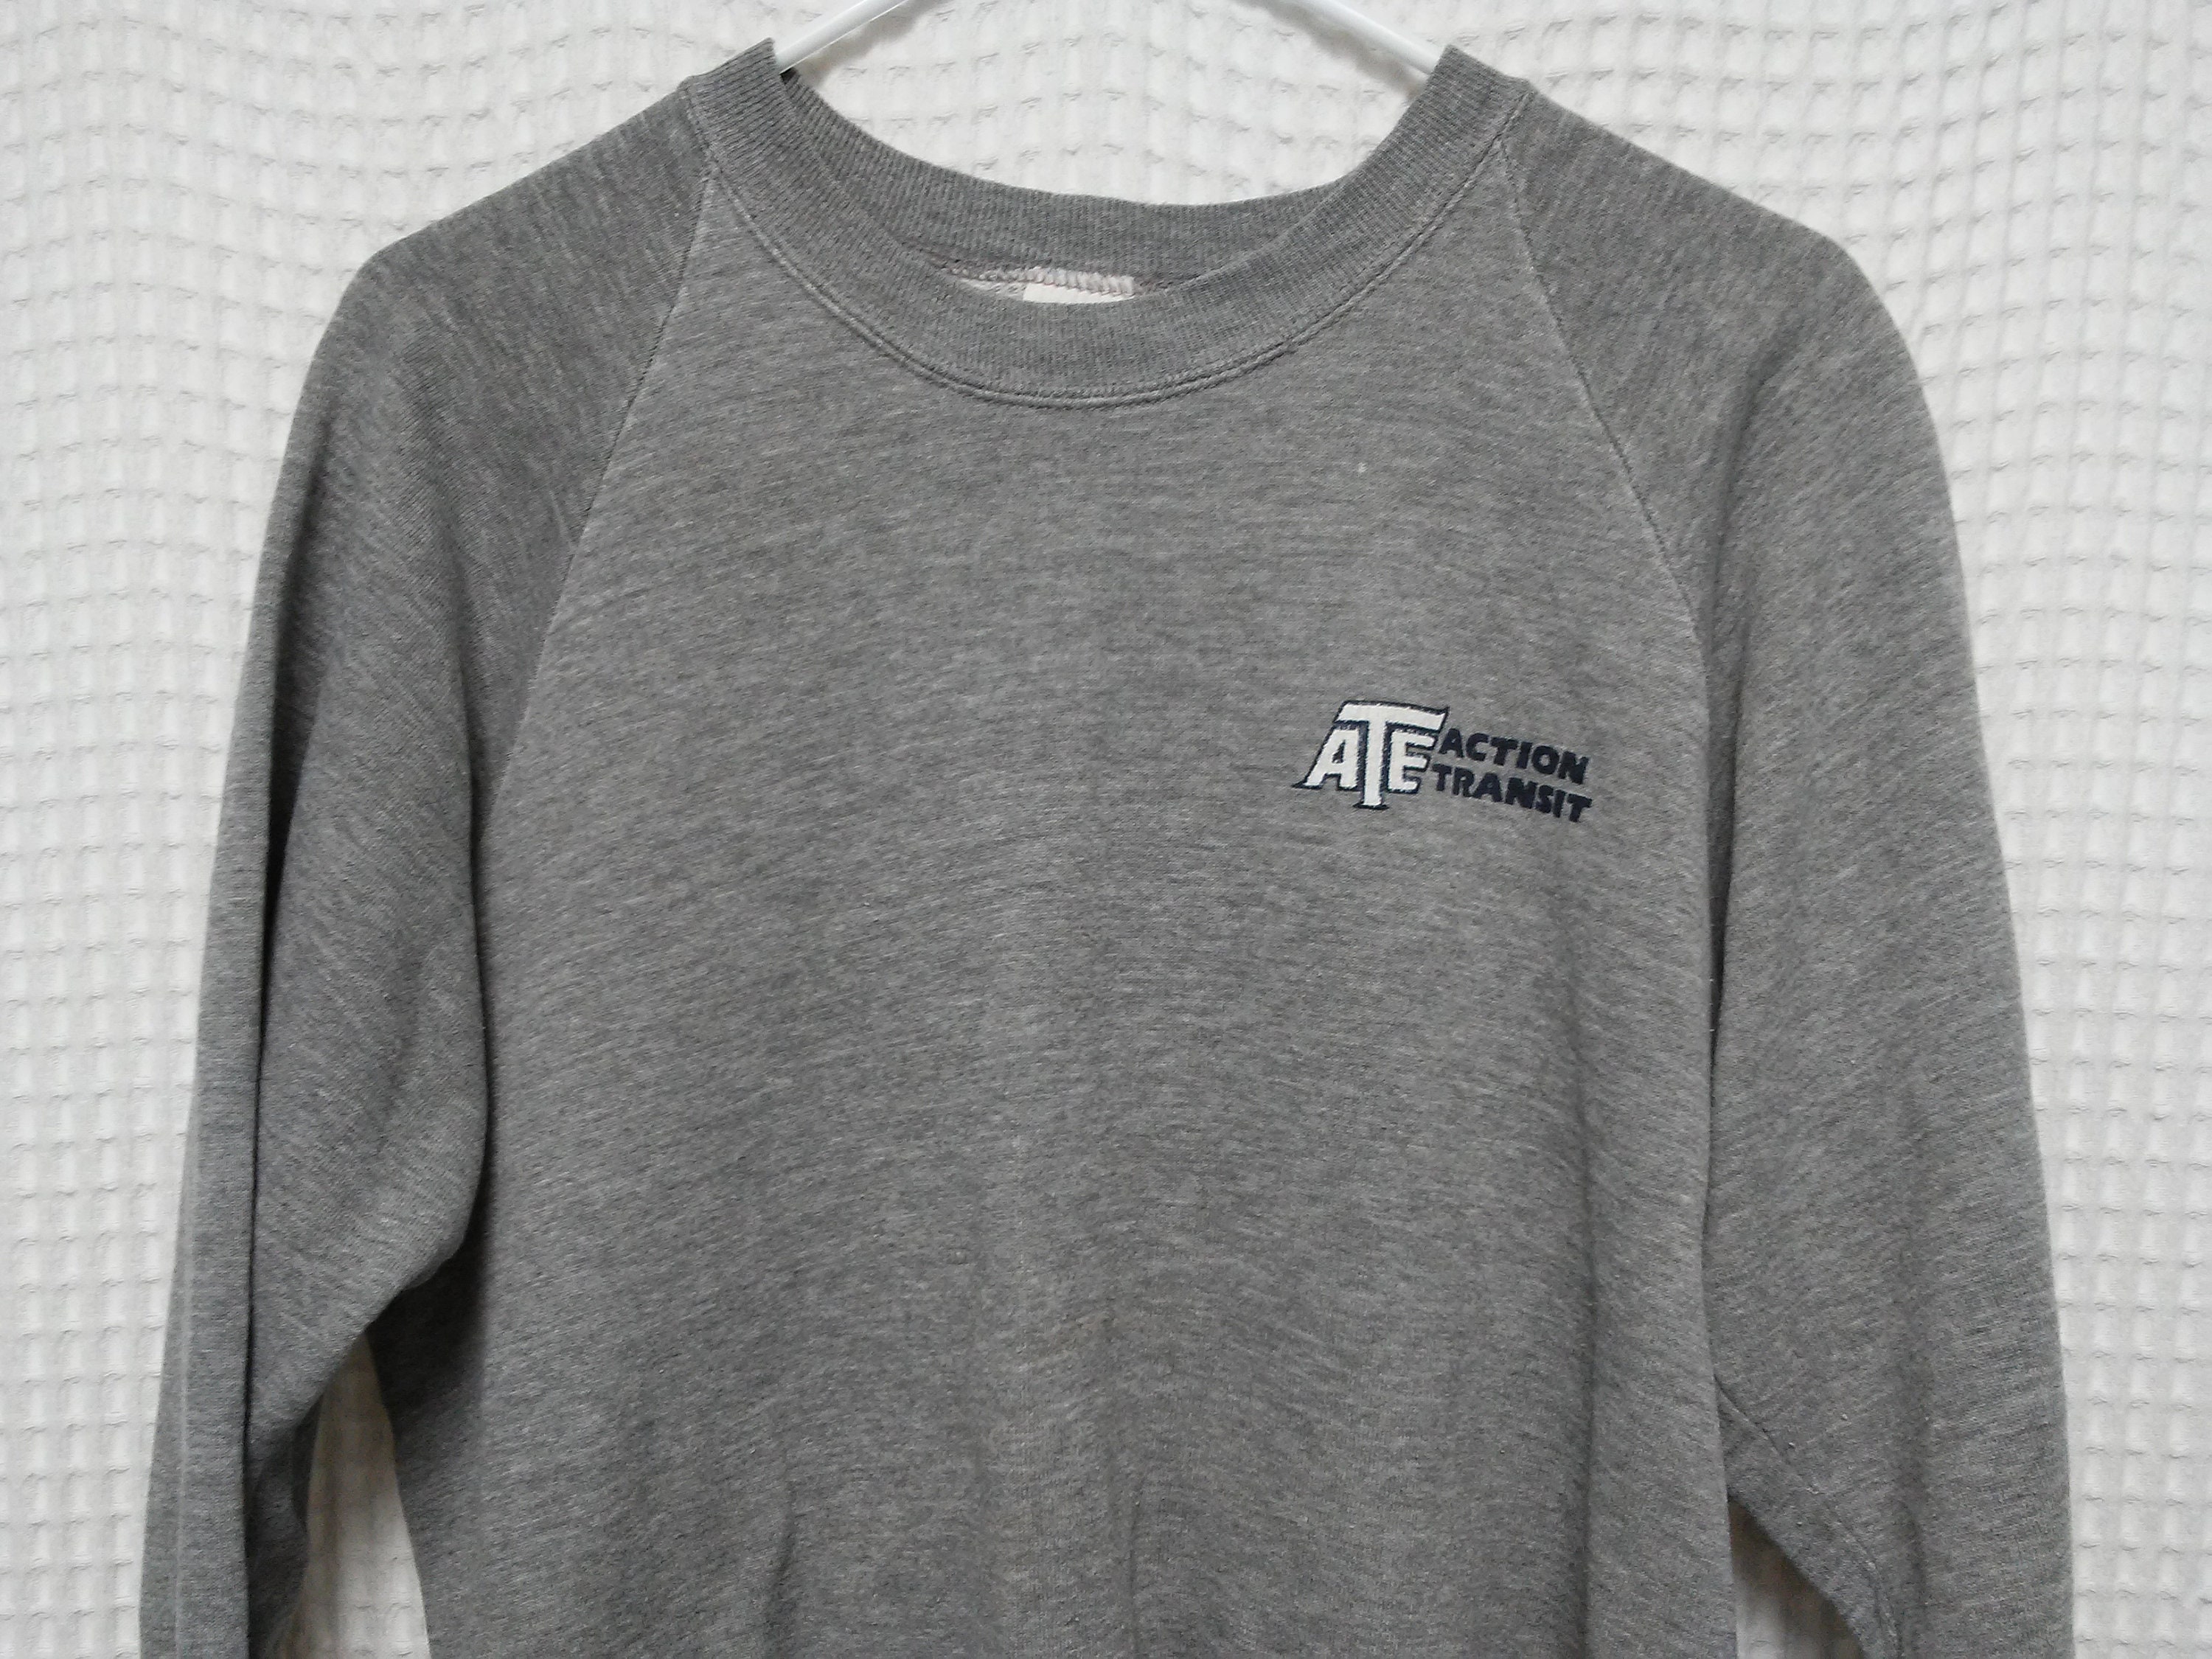 Vintage Tri Blend Heathered Gray Sweatshirt 80S 90S Buttery Soft M/L Made in Usa Grunge Skate Punk Action Transit School Bus Double Sided